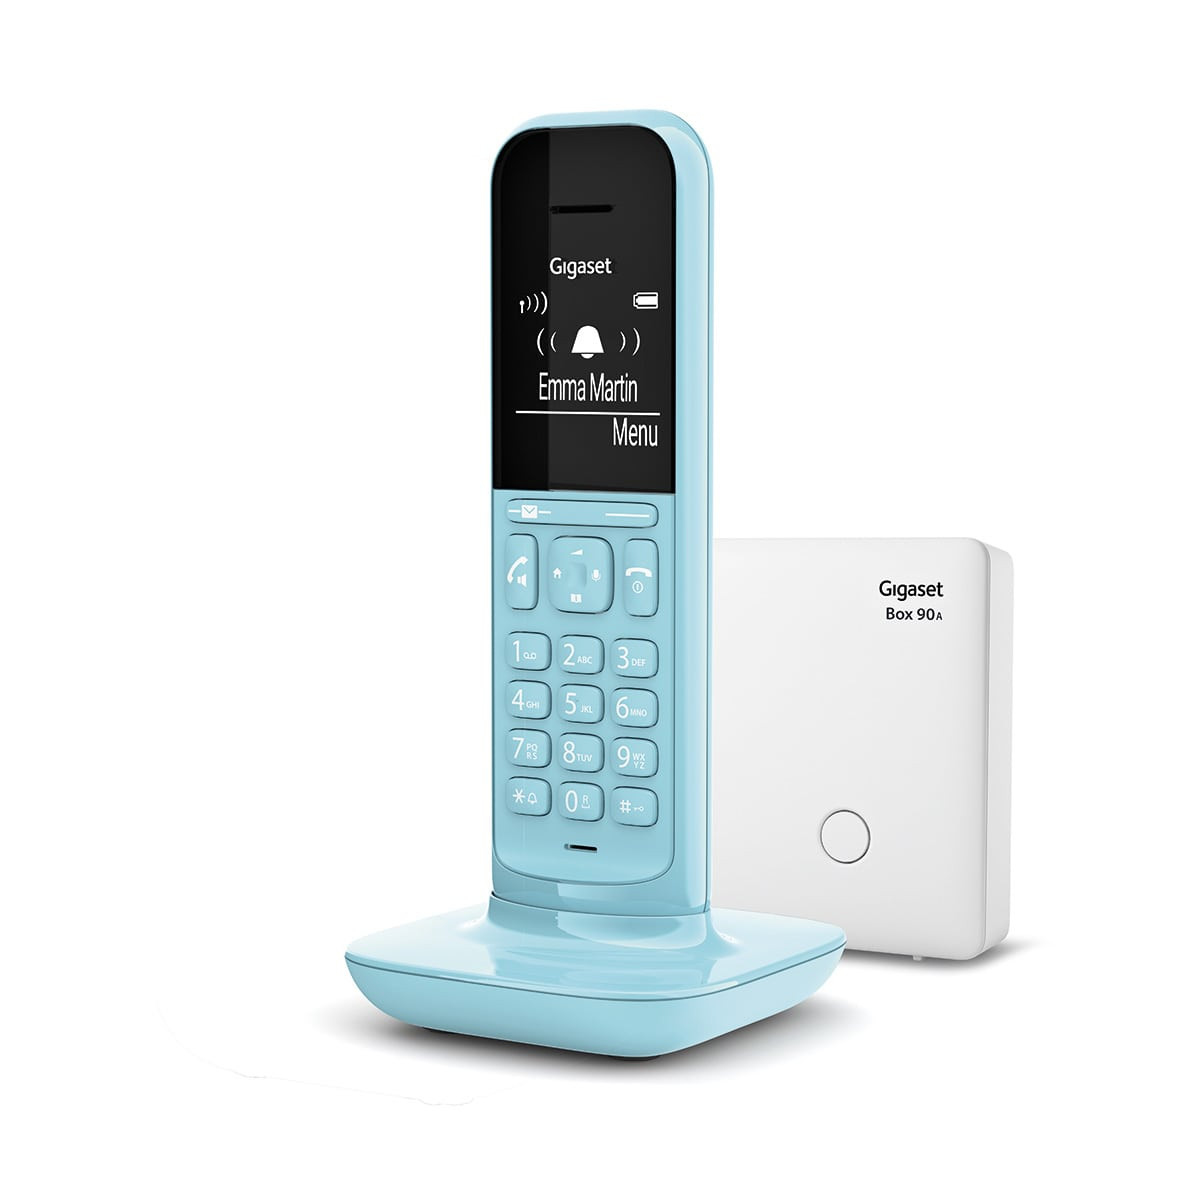 S30852-H2922-B104 UNIFY GIGASET OPENSTAGE CL390A - Analog/DECT telephone - Wireless handset - Speakerphone - 150 entries - Blue